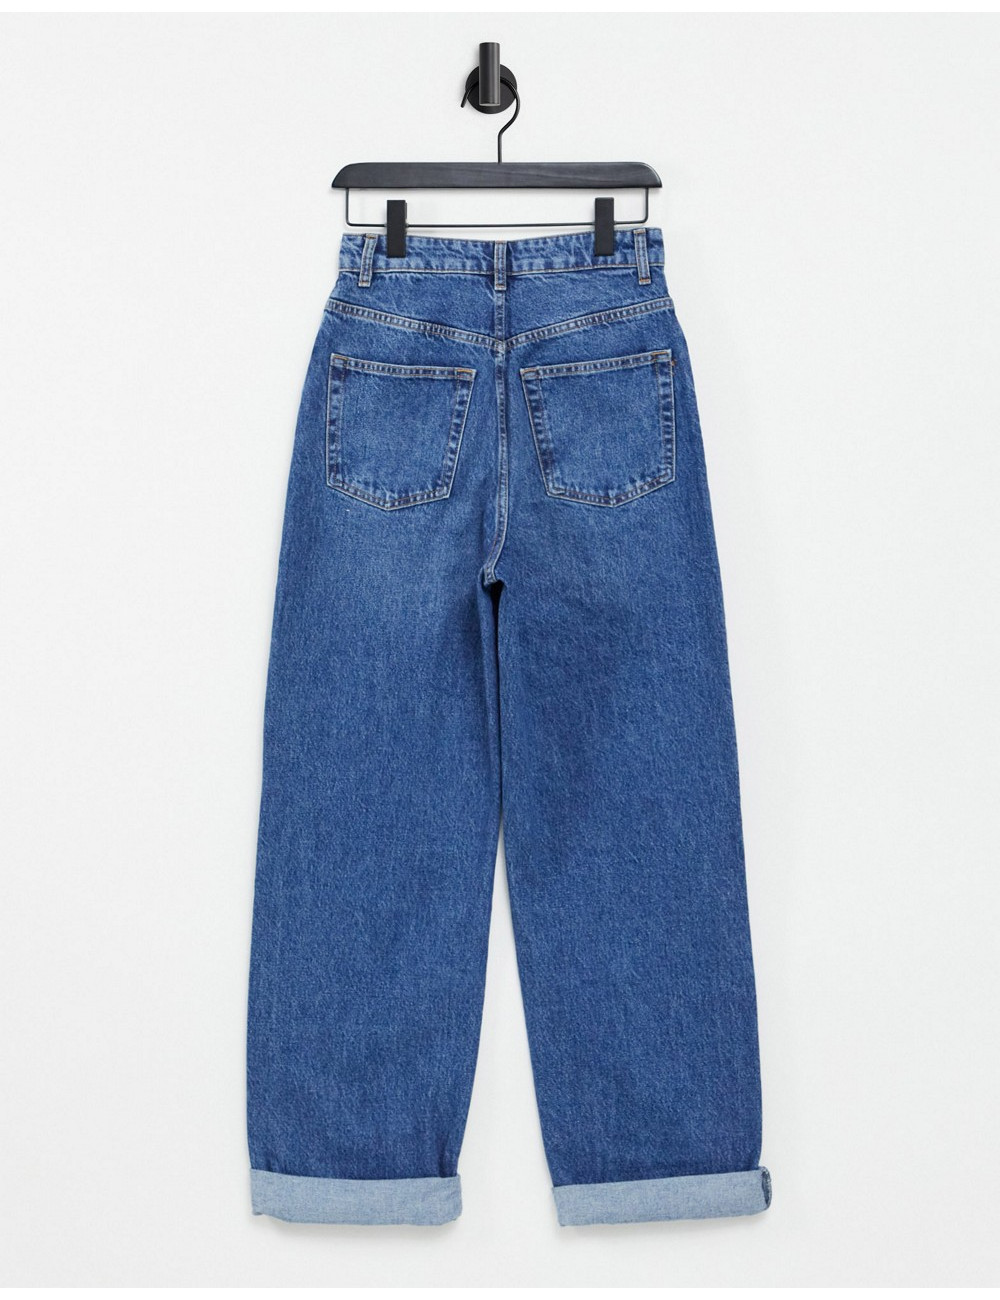 Topshop oversized mom jeans...